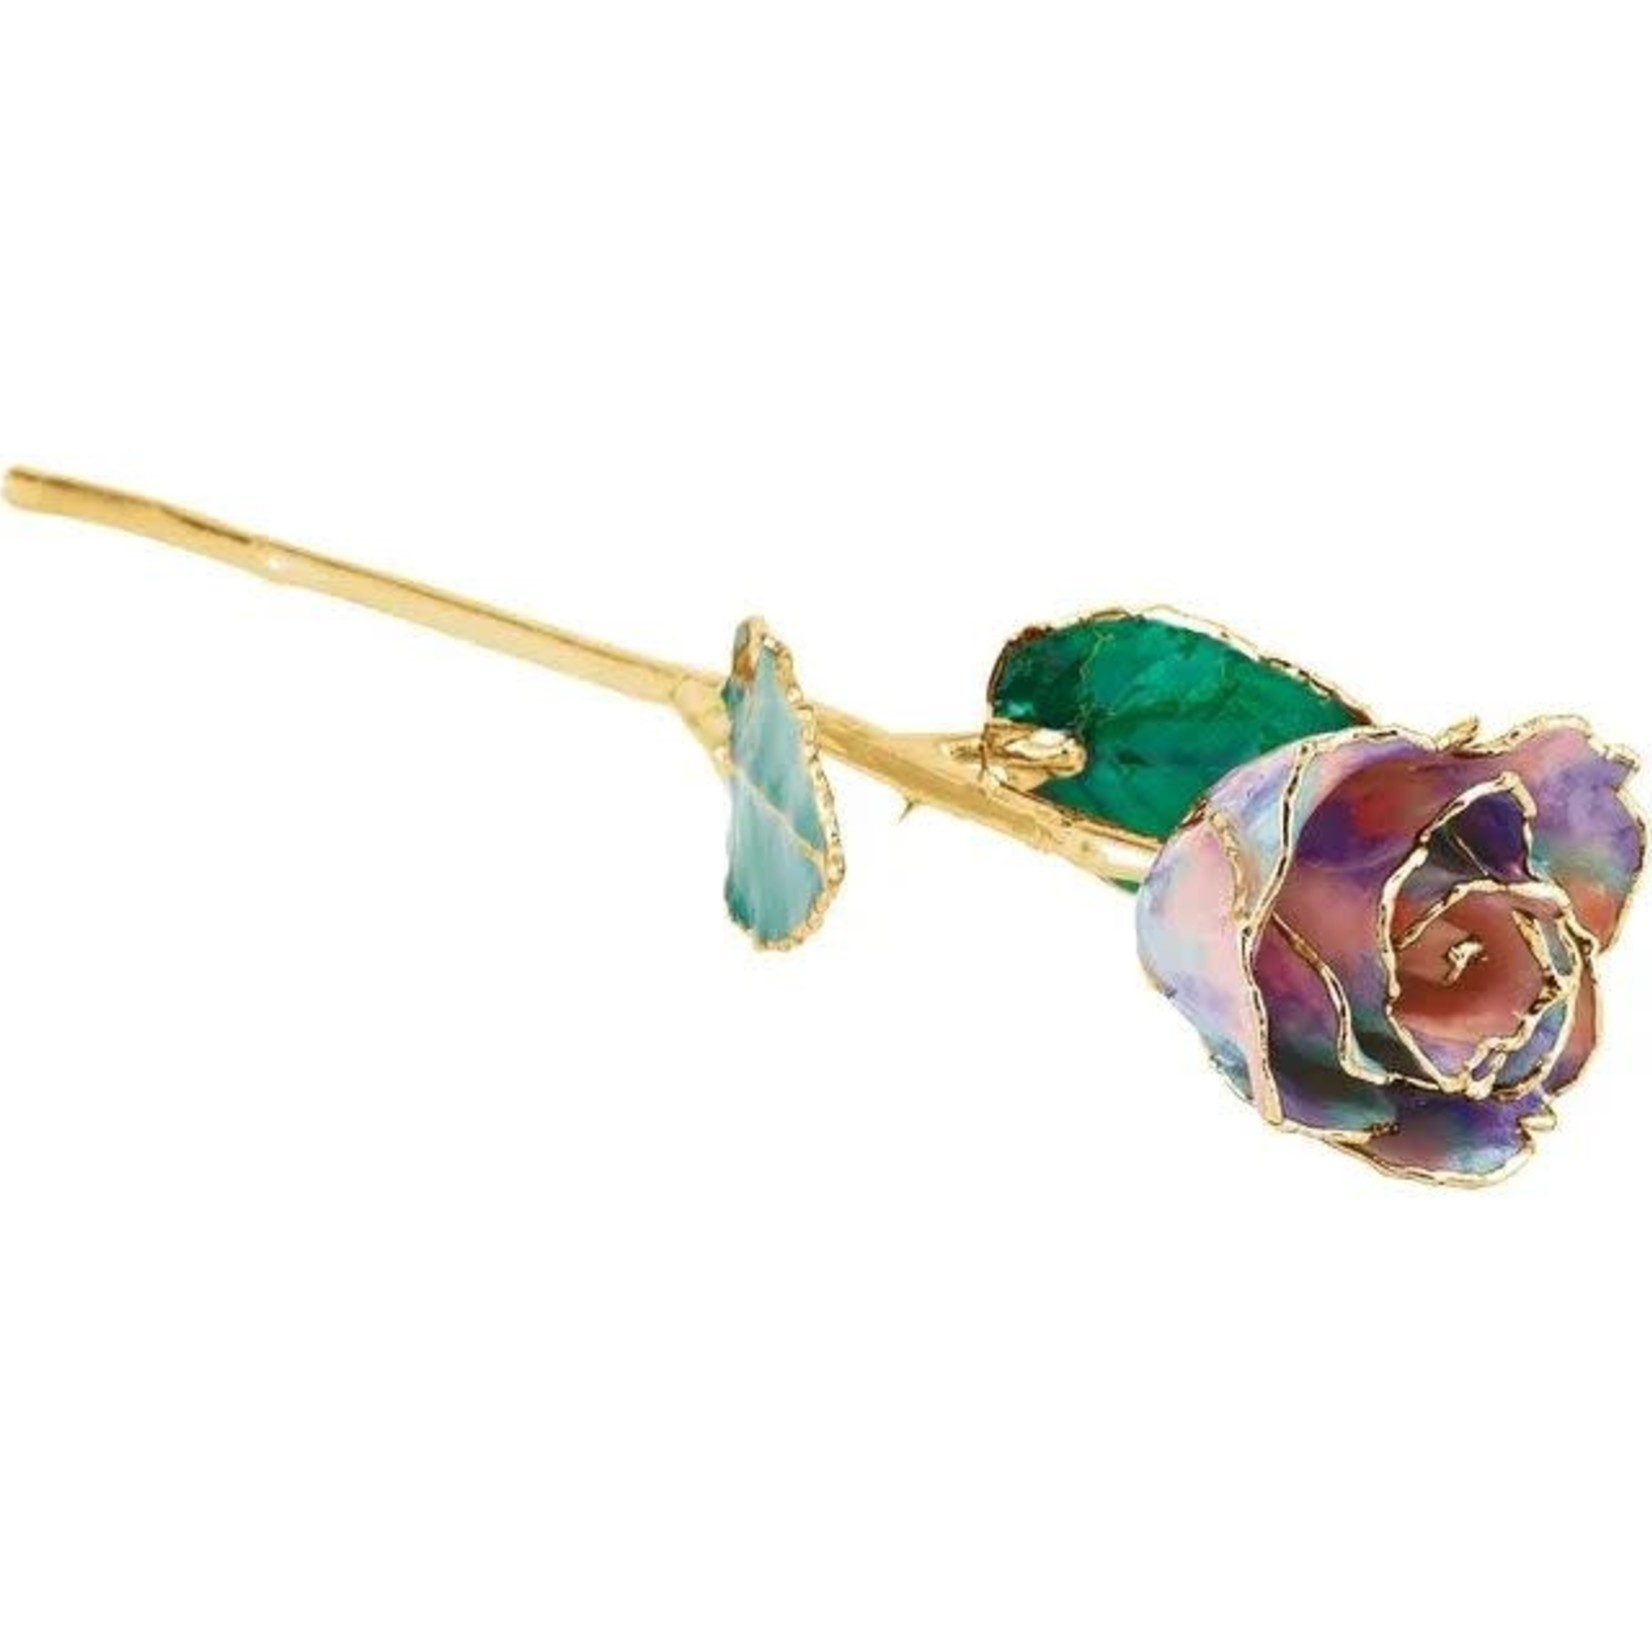 STULLER INC. Lacquer Dipped 24K Gold Trimmed Opal Rose